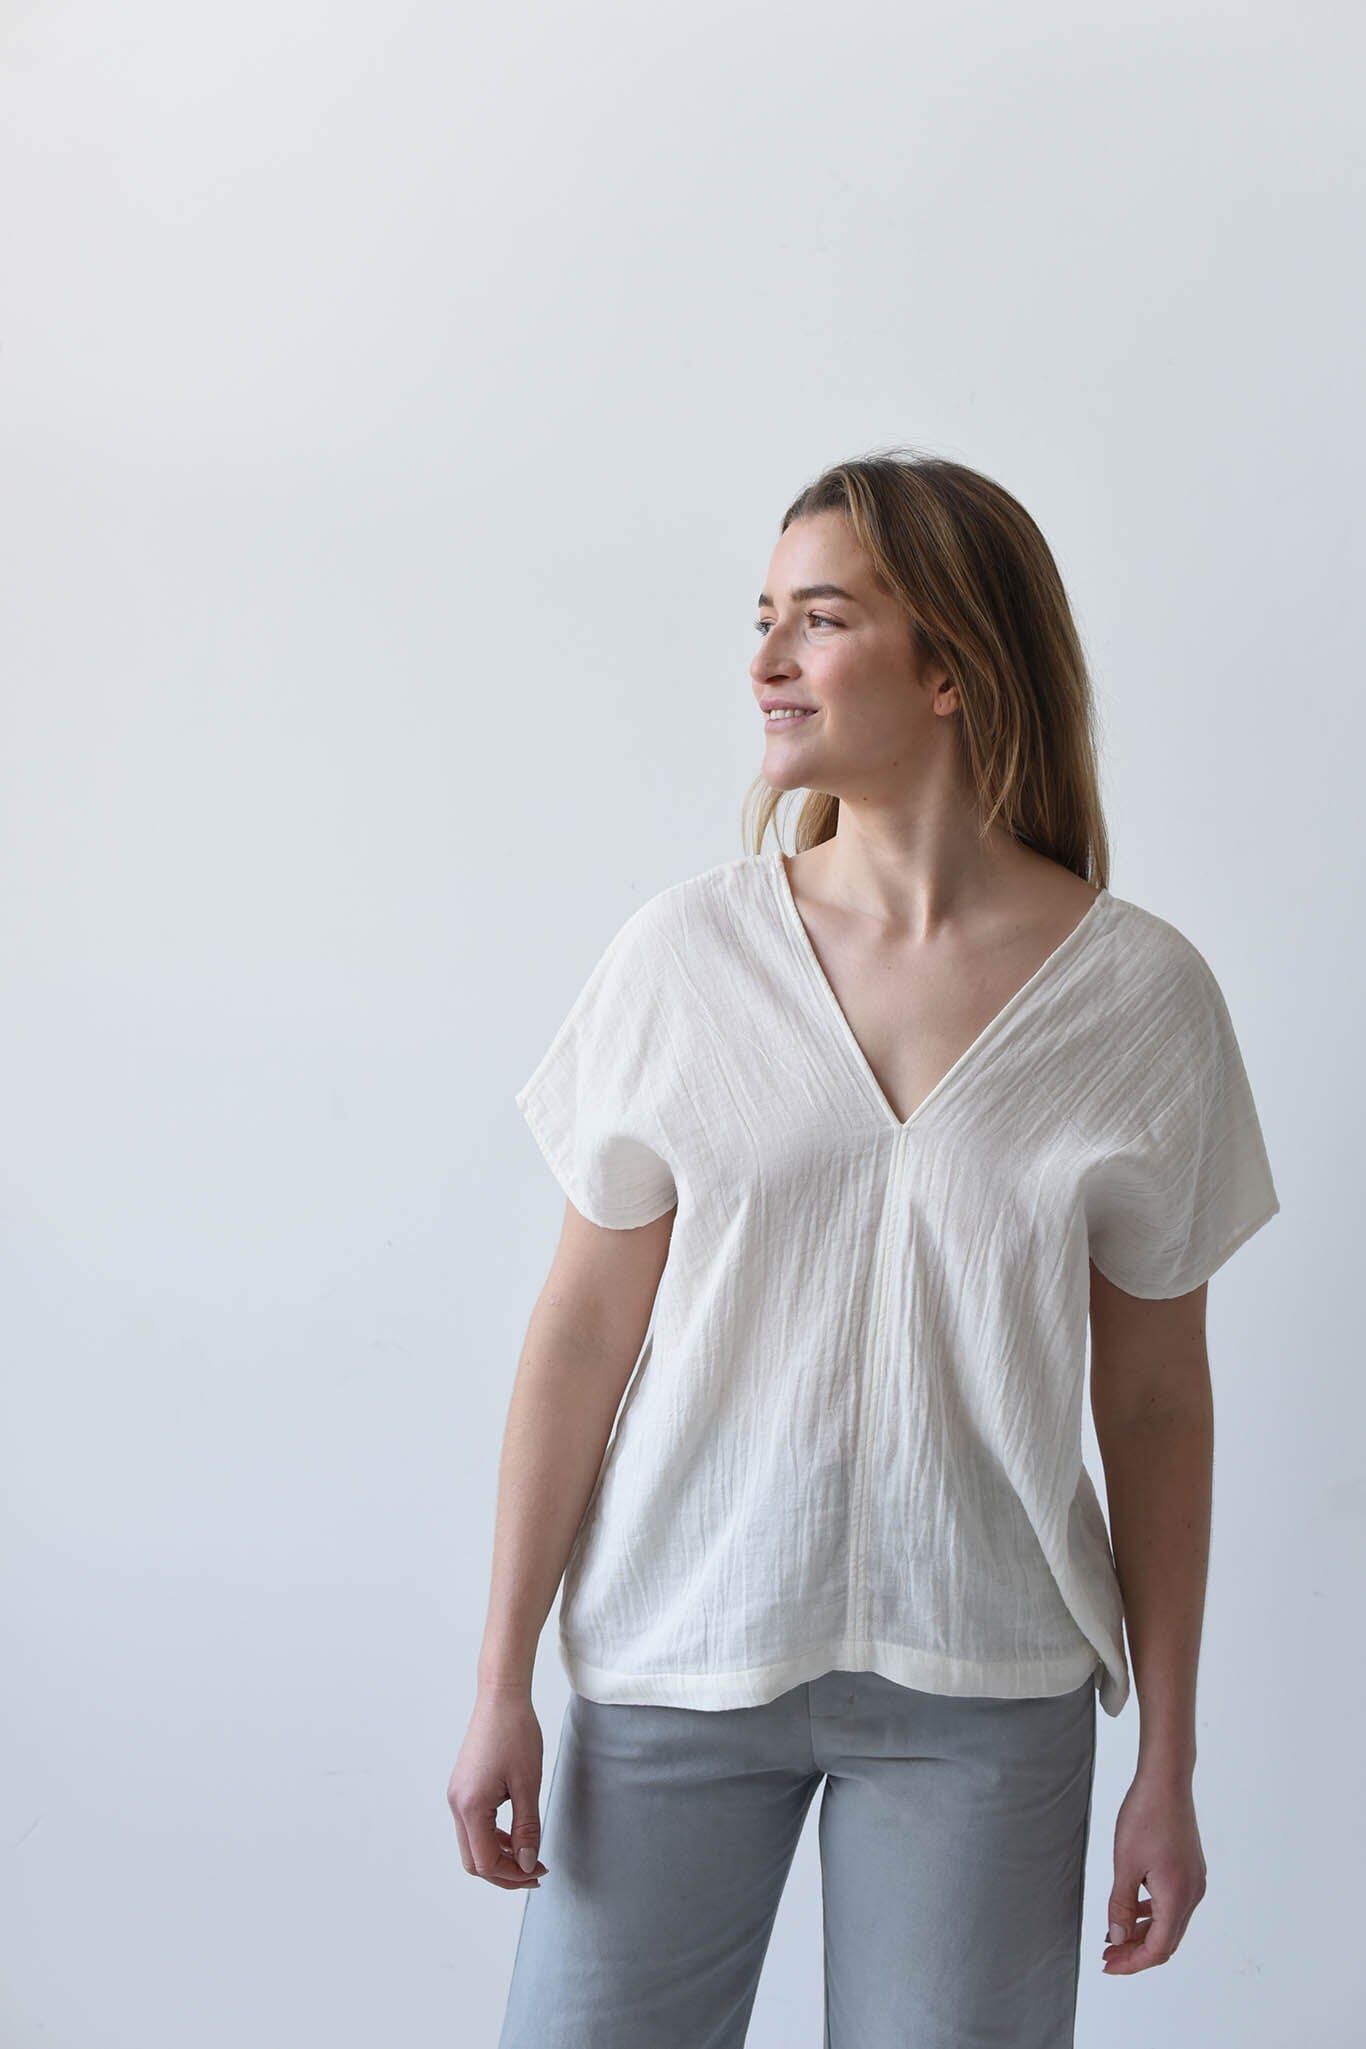 A perfect summer cotton top. Top for warm weather. V-neck.